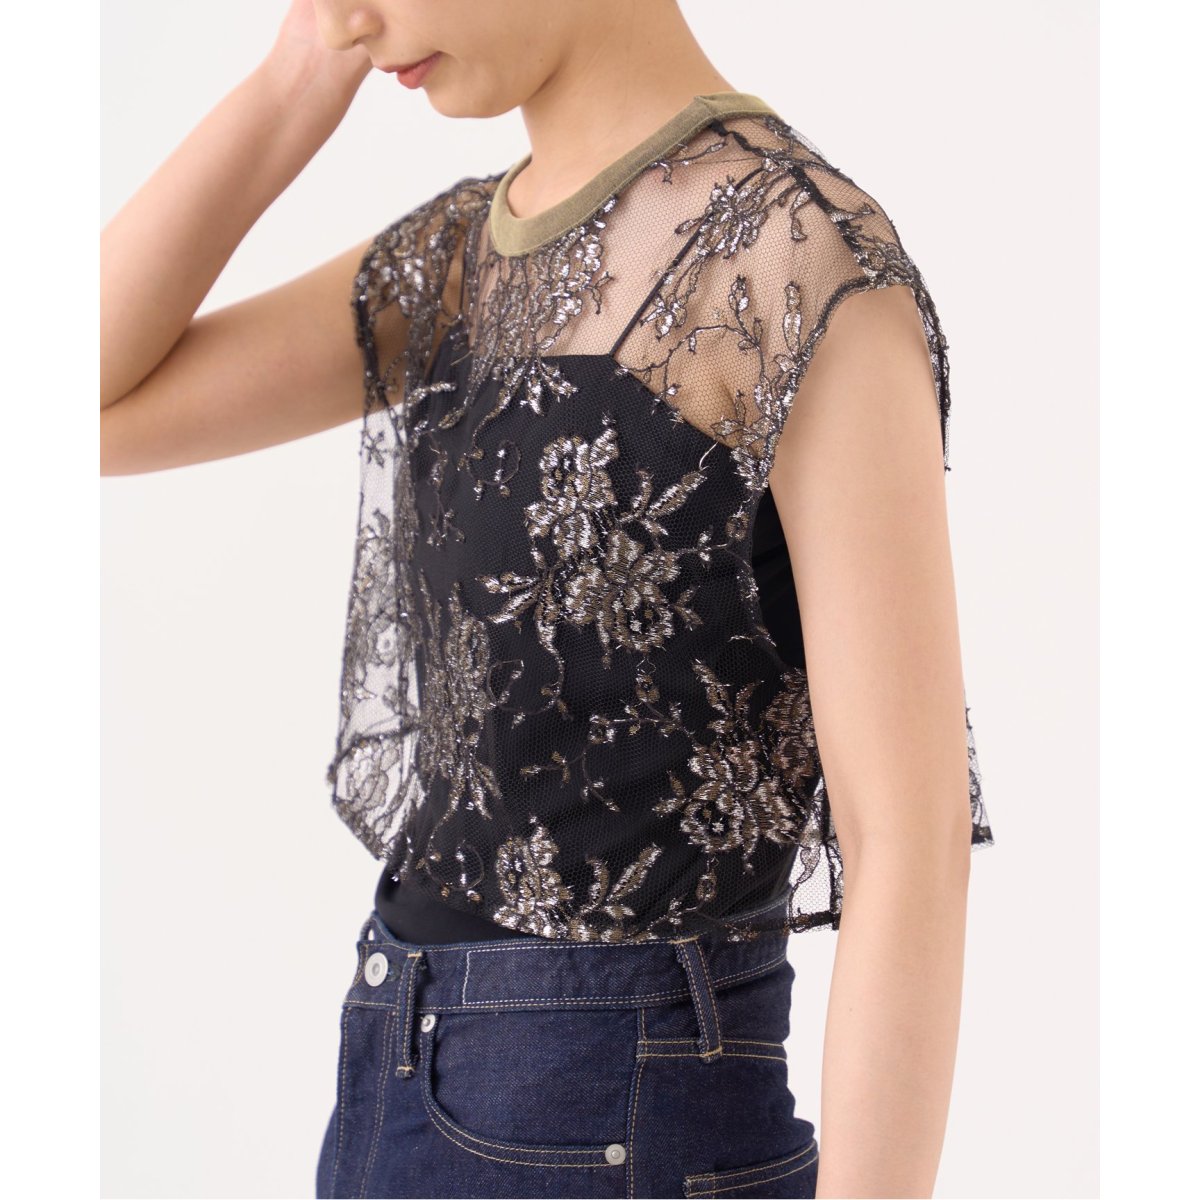 MARGE/マージ】LACE SHORT GILLET / レースショートジレ | イエナ(IENA